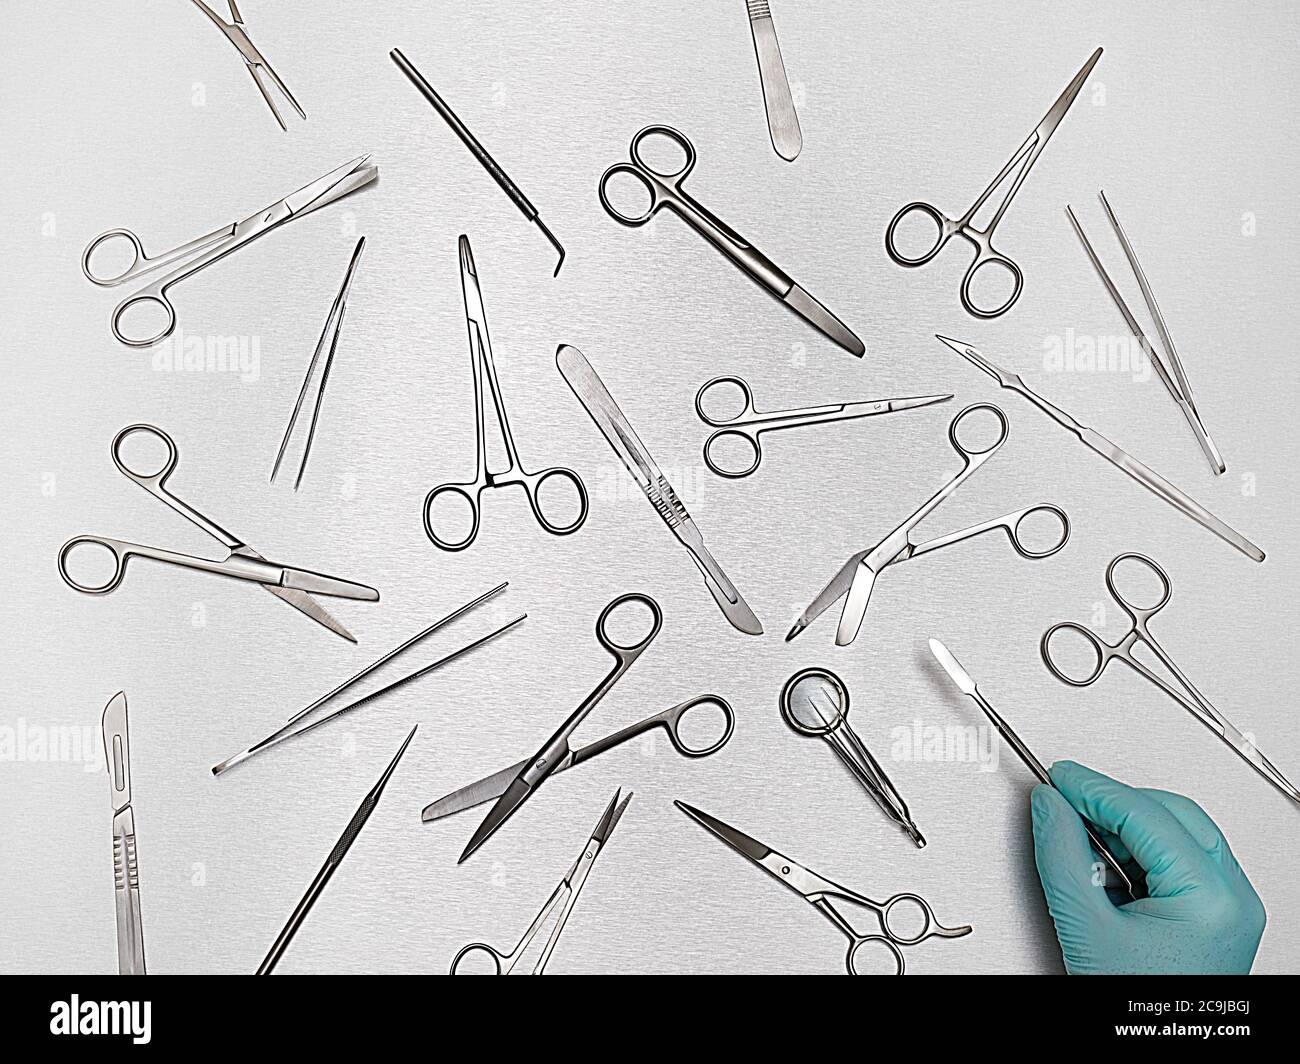 Person selecting surgical equipment against a grey background. Stock Photo